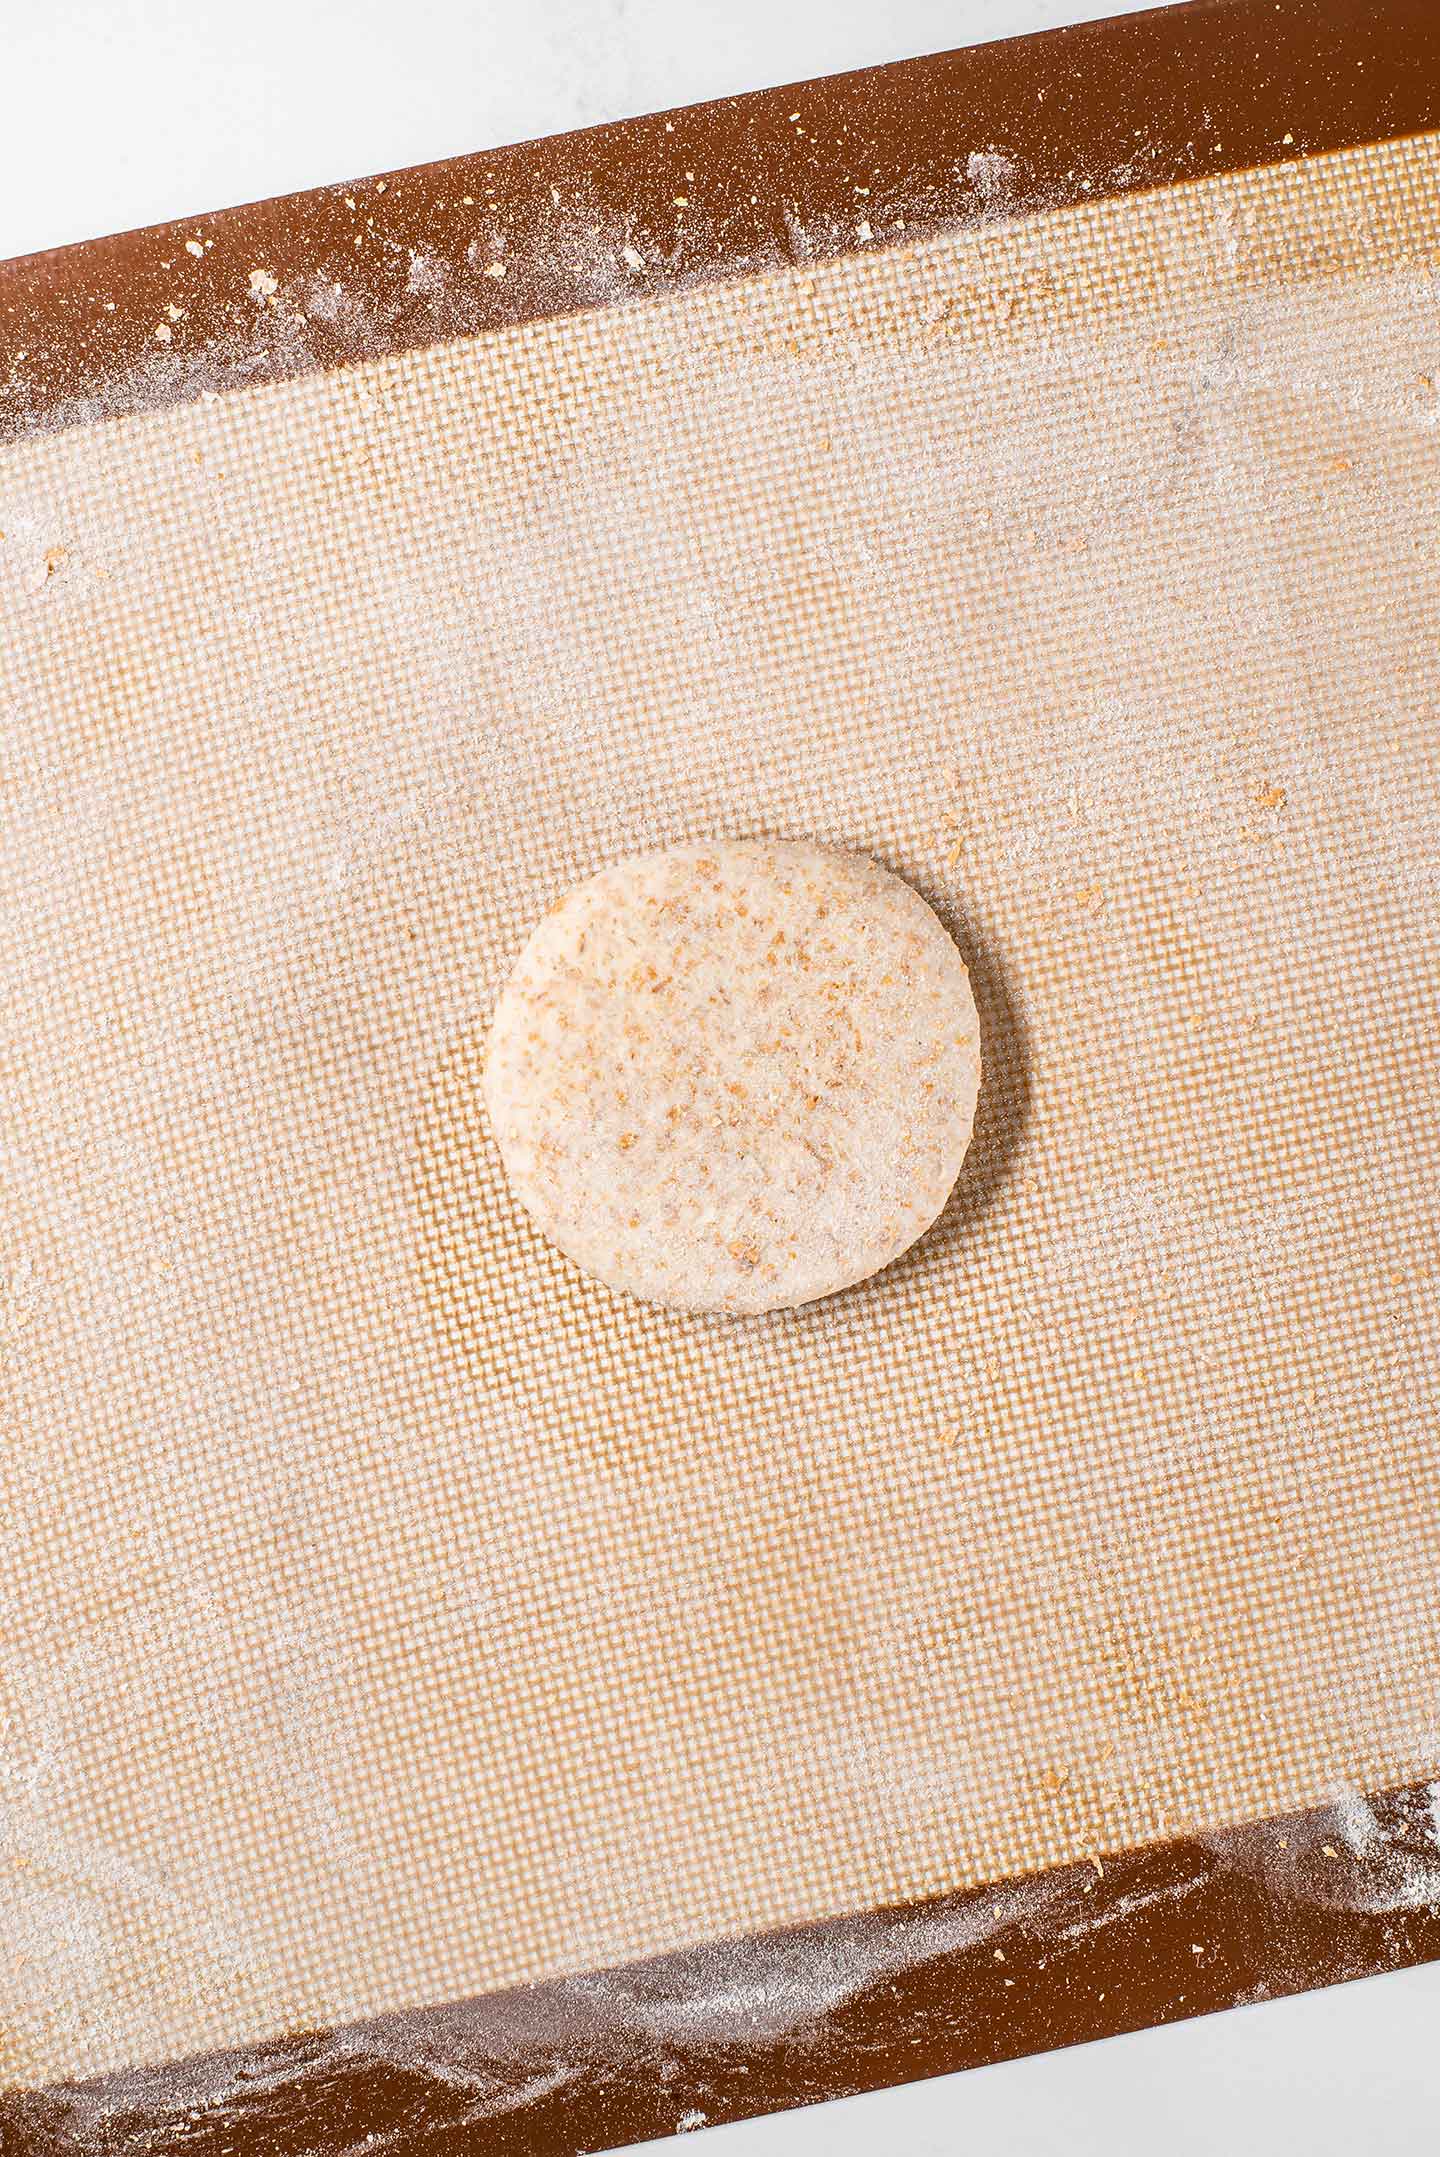 Top down view of a single flattened ball of roti dough on a silicone mat before it is rolled into a larger flat roti.